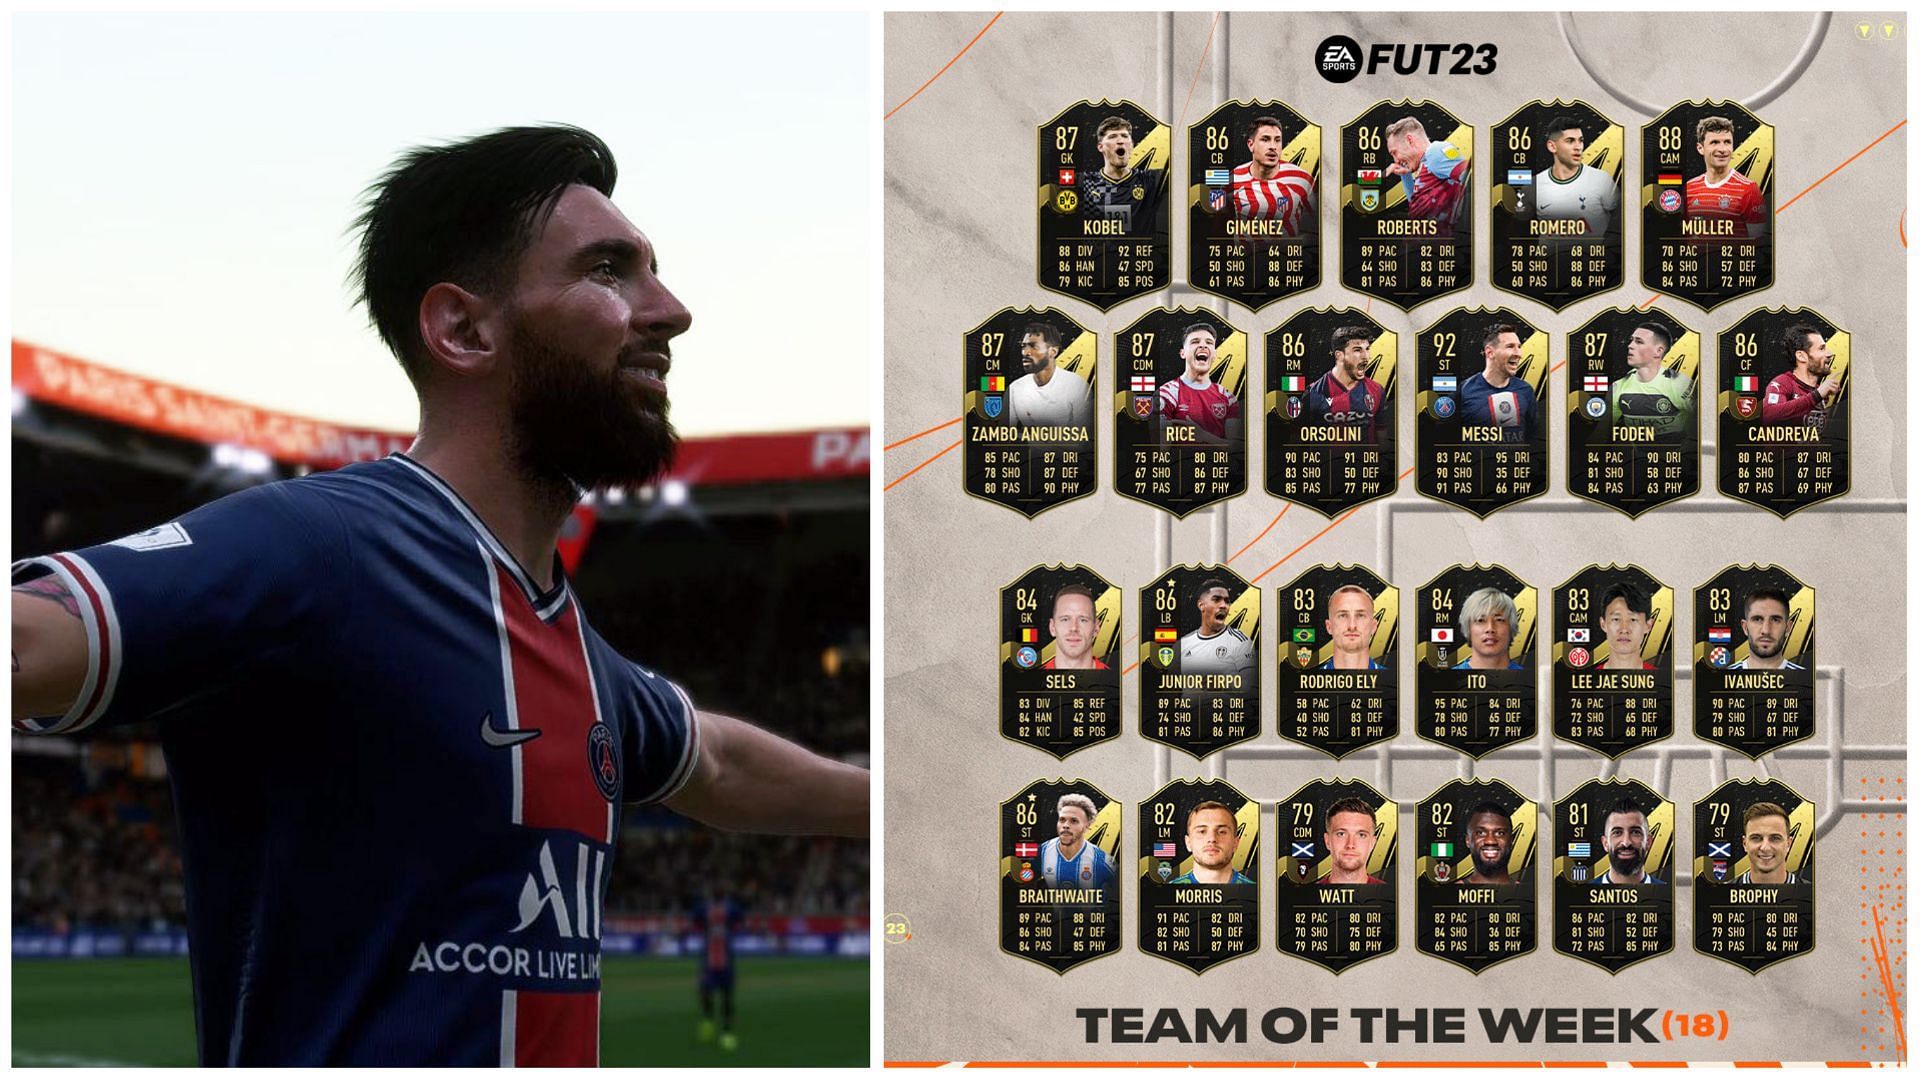 TOTW 18 is live in FIFA 23 (Images via EA Sports)